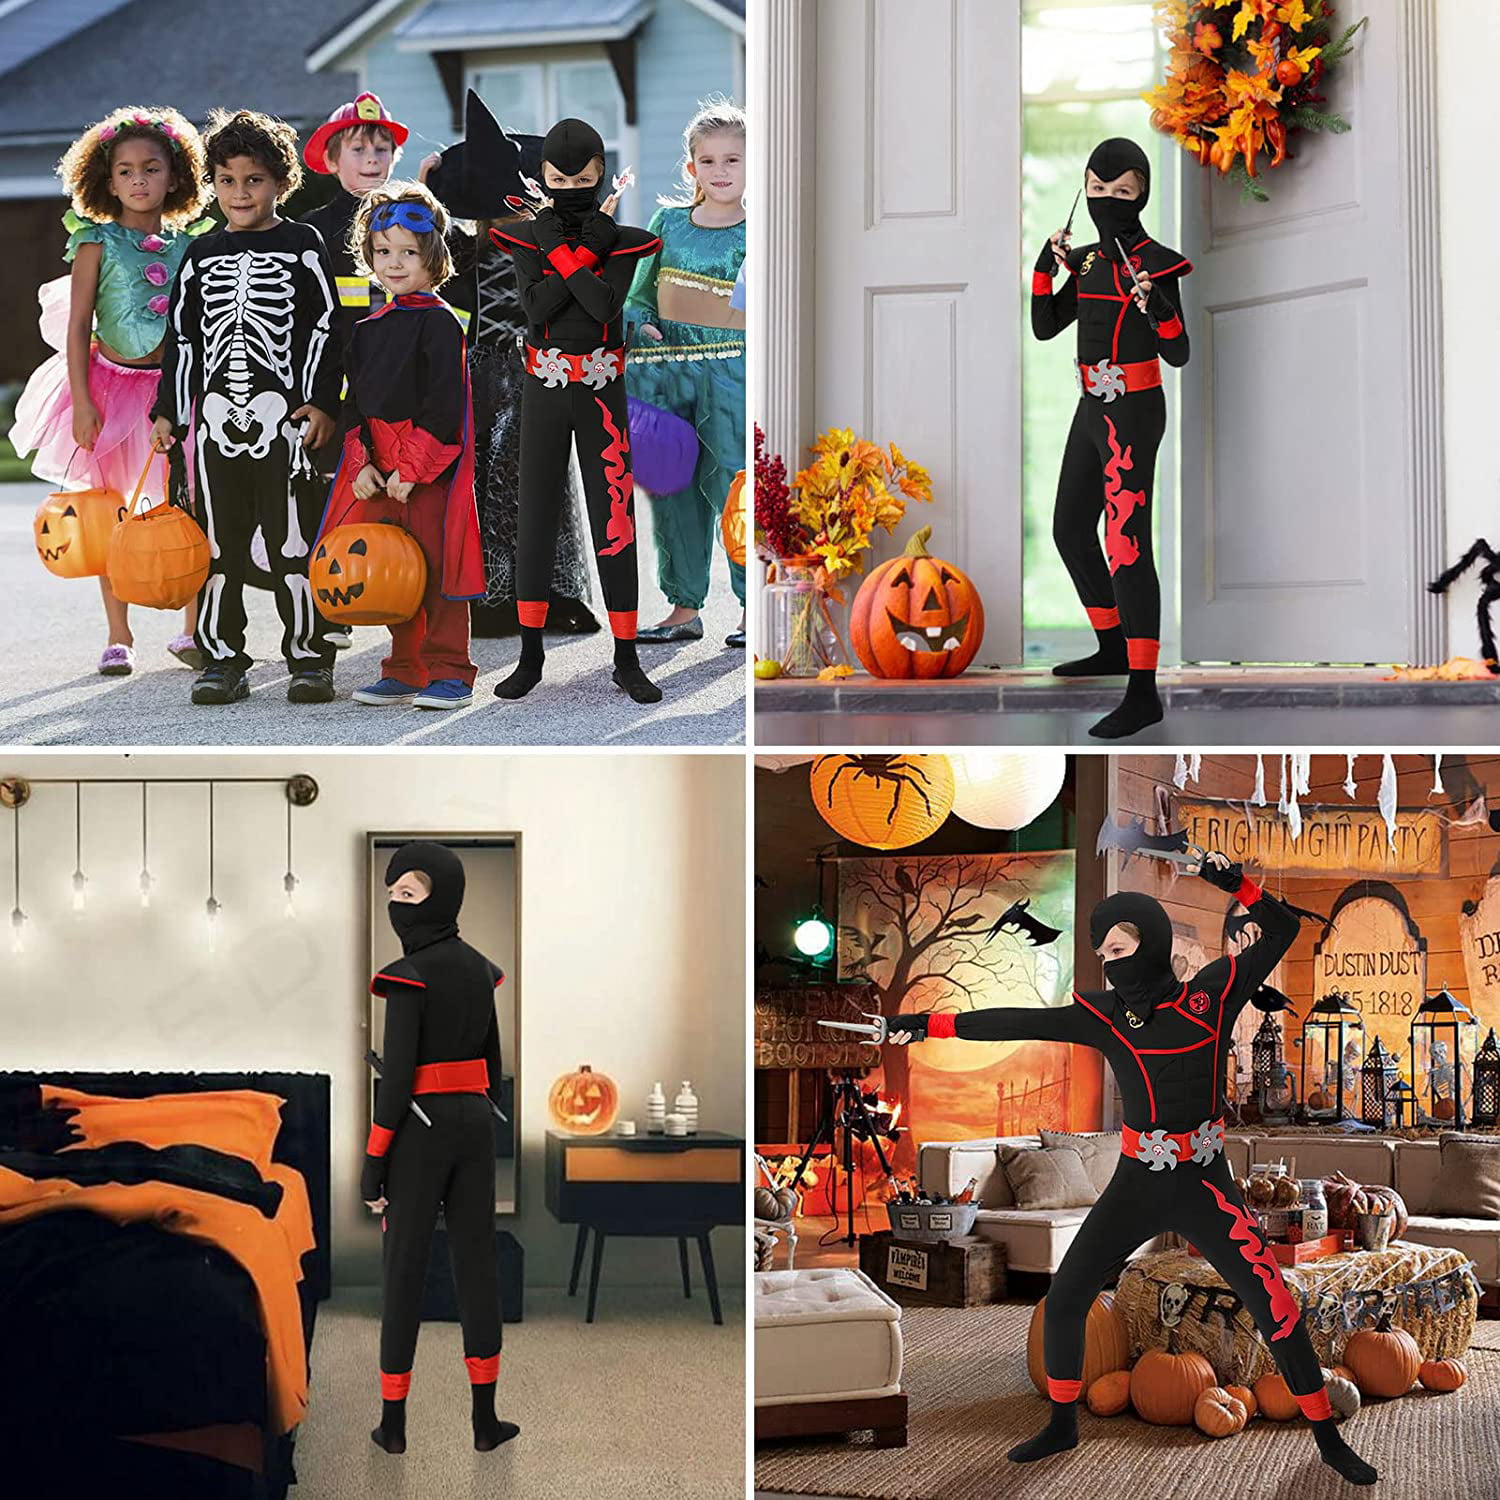 Kids Ninja Costume With Included Accessories M